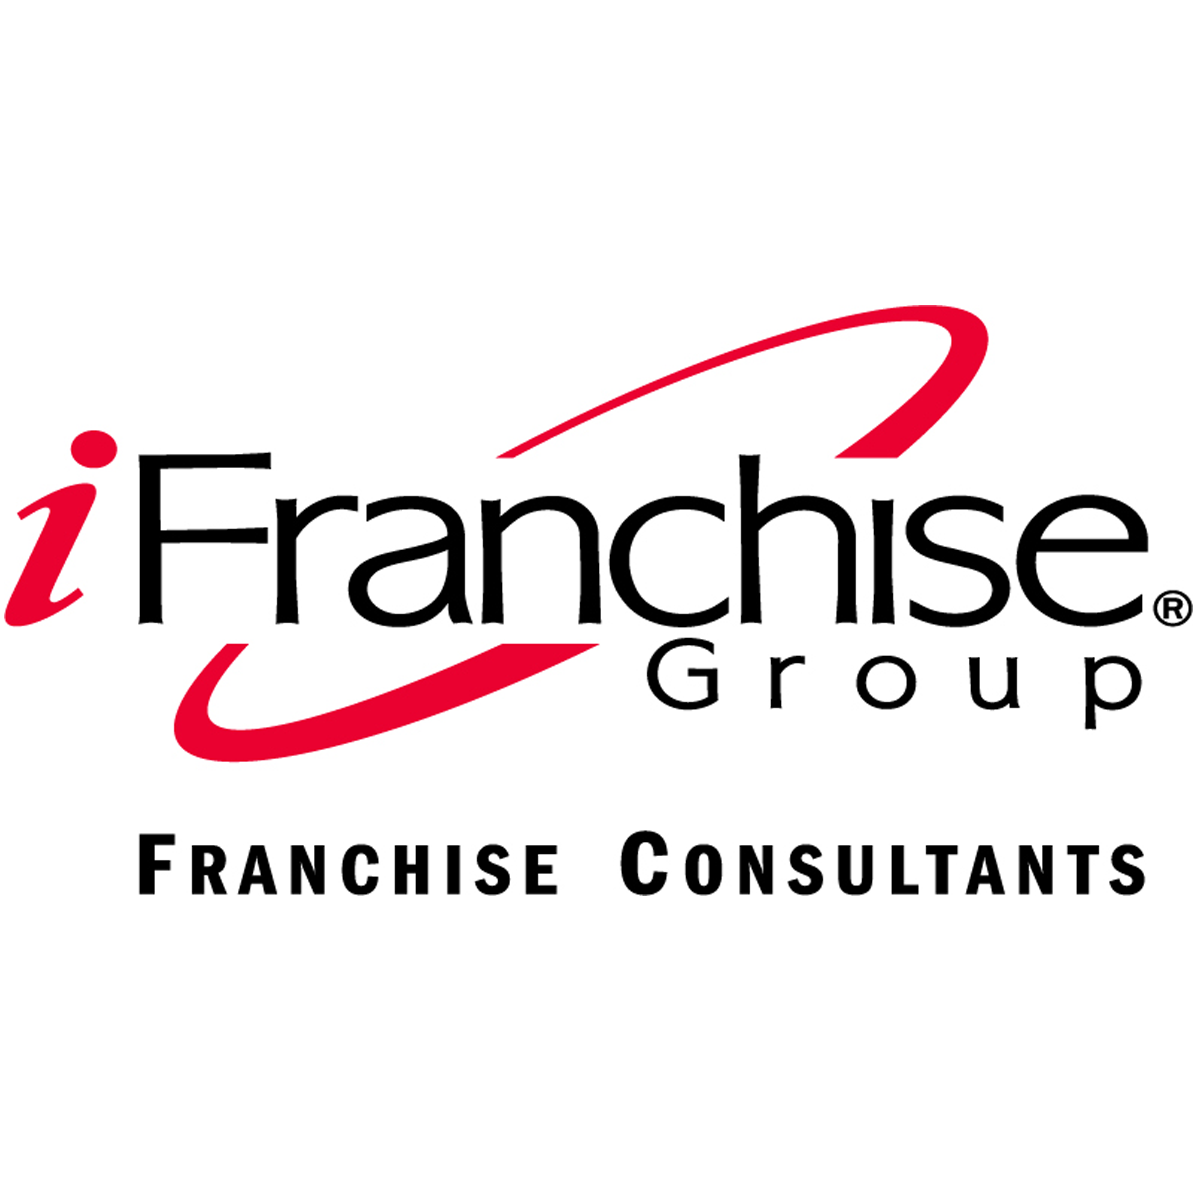 Emiliano Jöcker from iFranchise Group Headshot Photo at Small Business Expo